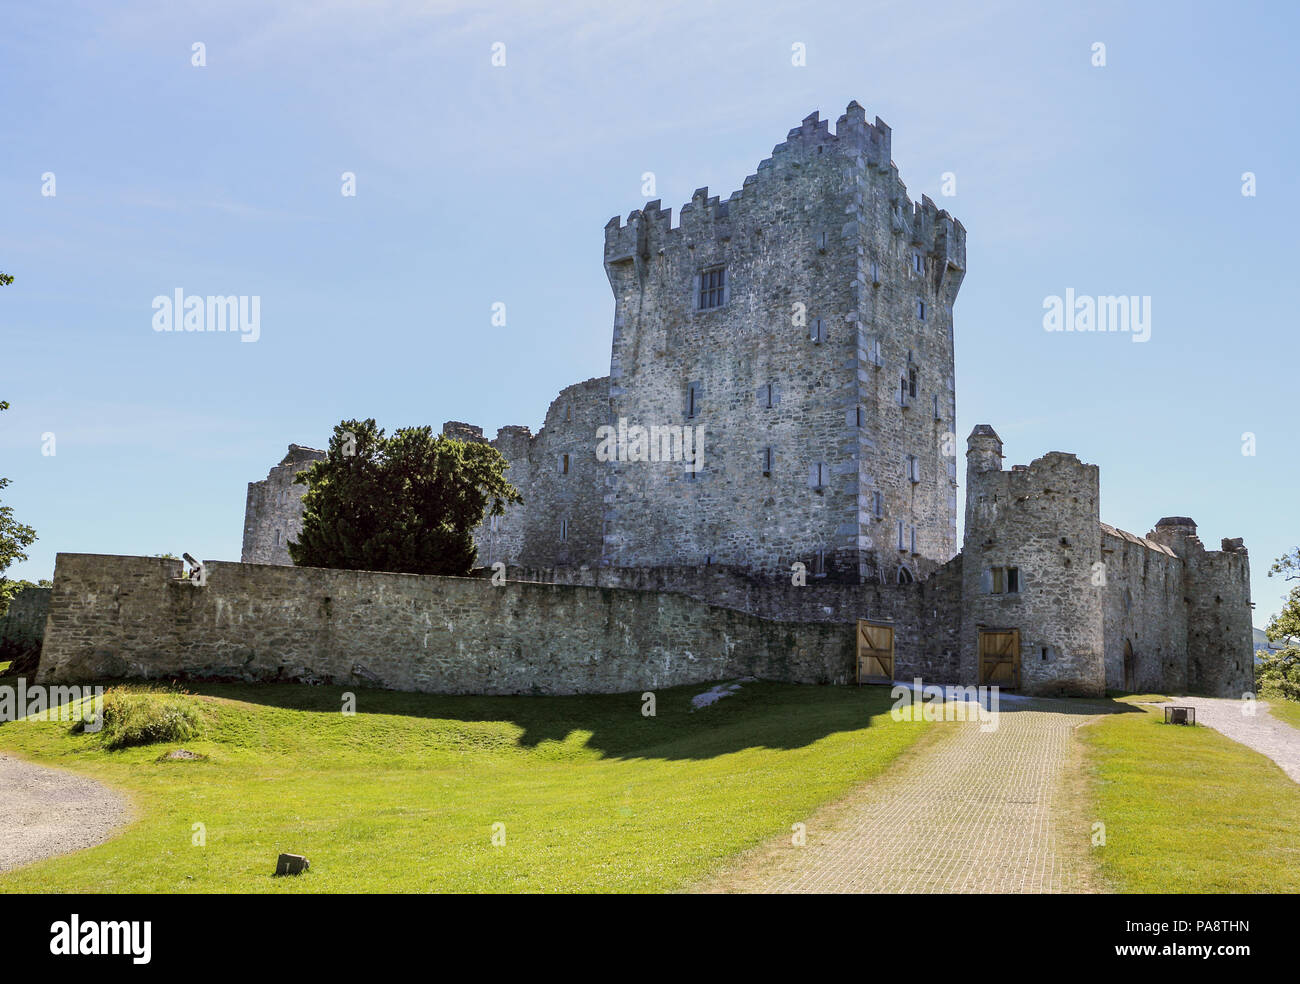 Ross Castle is a 15th-century tower house and keep on the edge of Lough Leane, in Killarney National Park, County Kerry, Ireland. Stock Photo